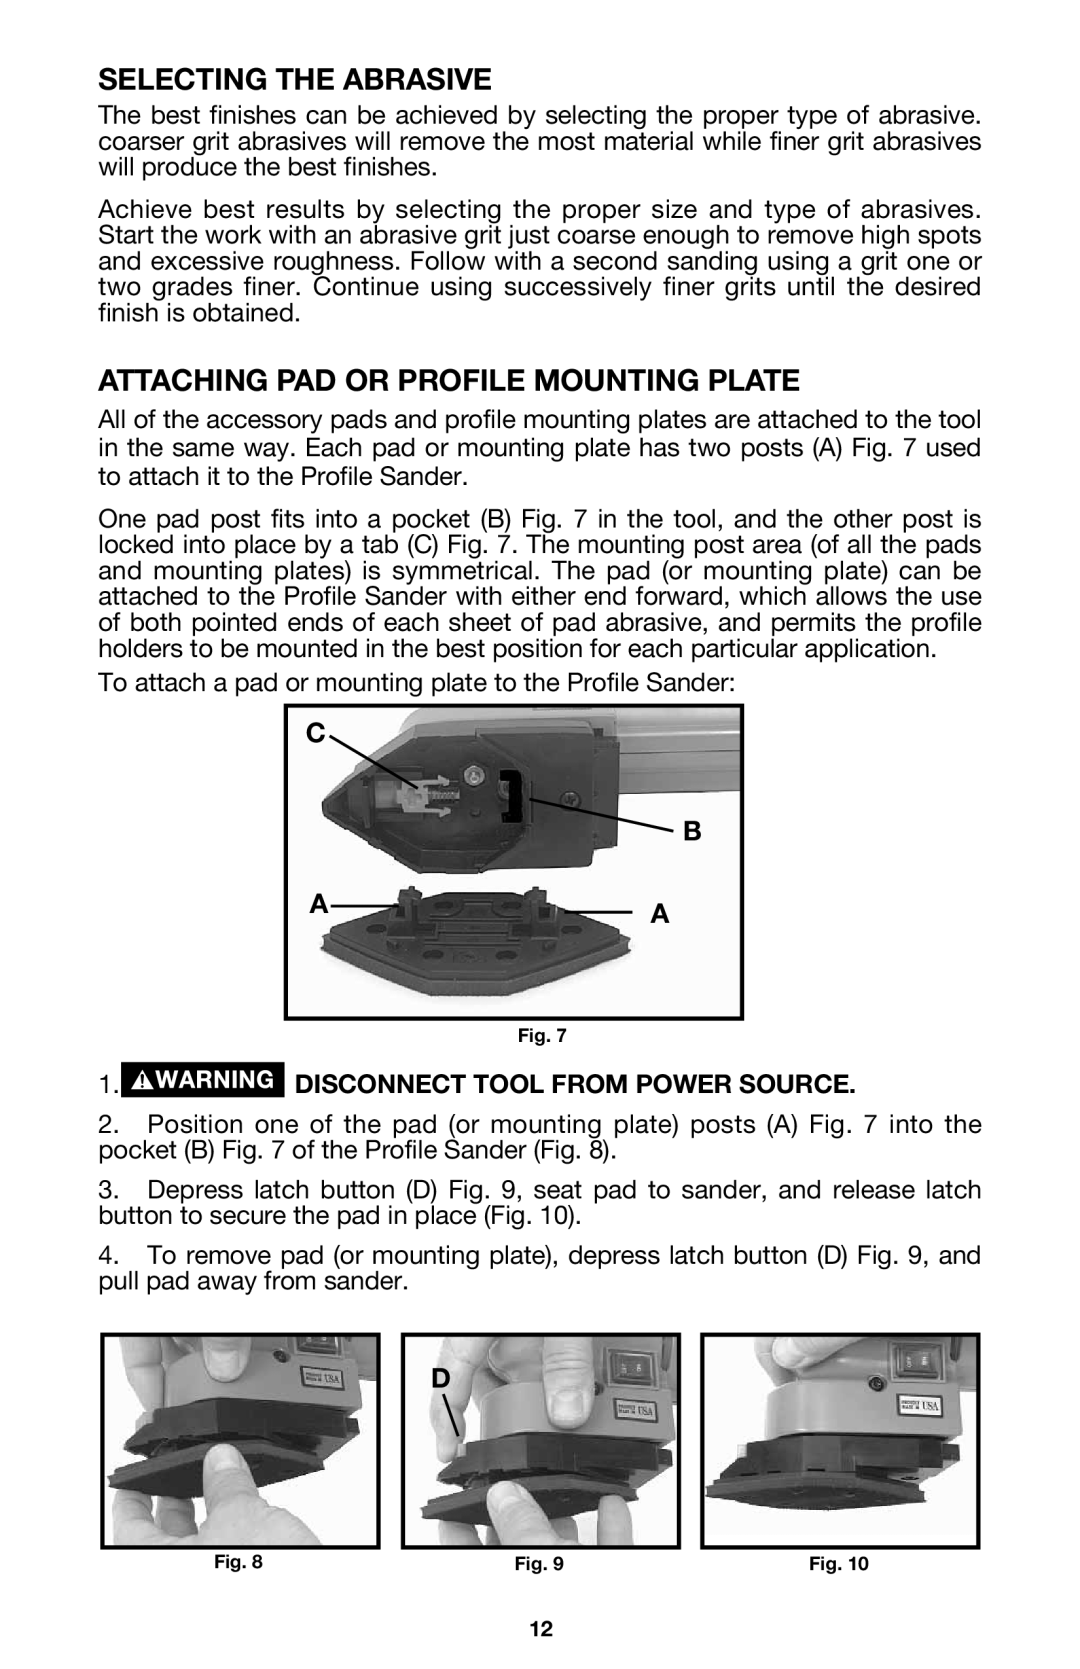 Porter-Cable 444vs instruction manual Selecting The Abrasive, Attaching Pad Or Profile Mounting Plate, C B A A 